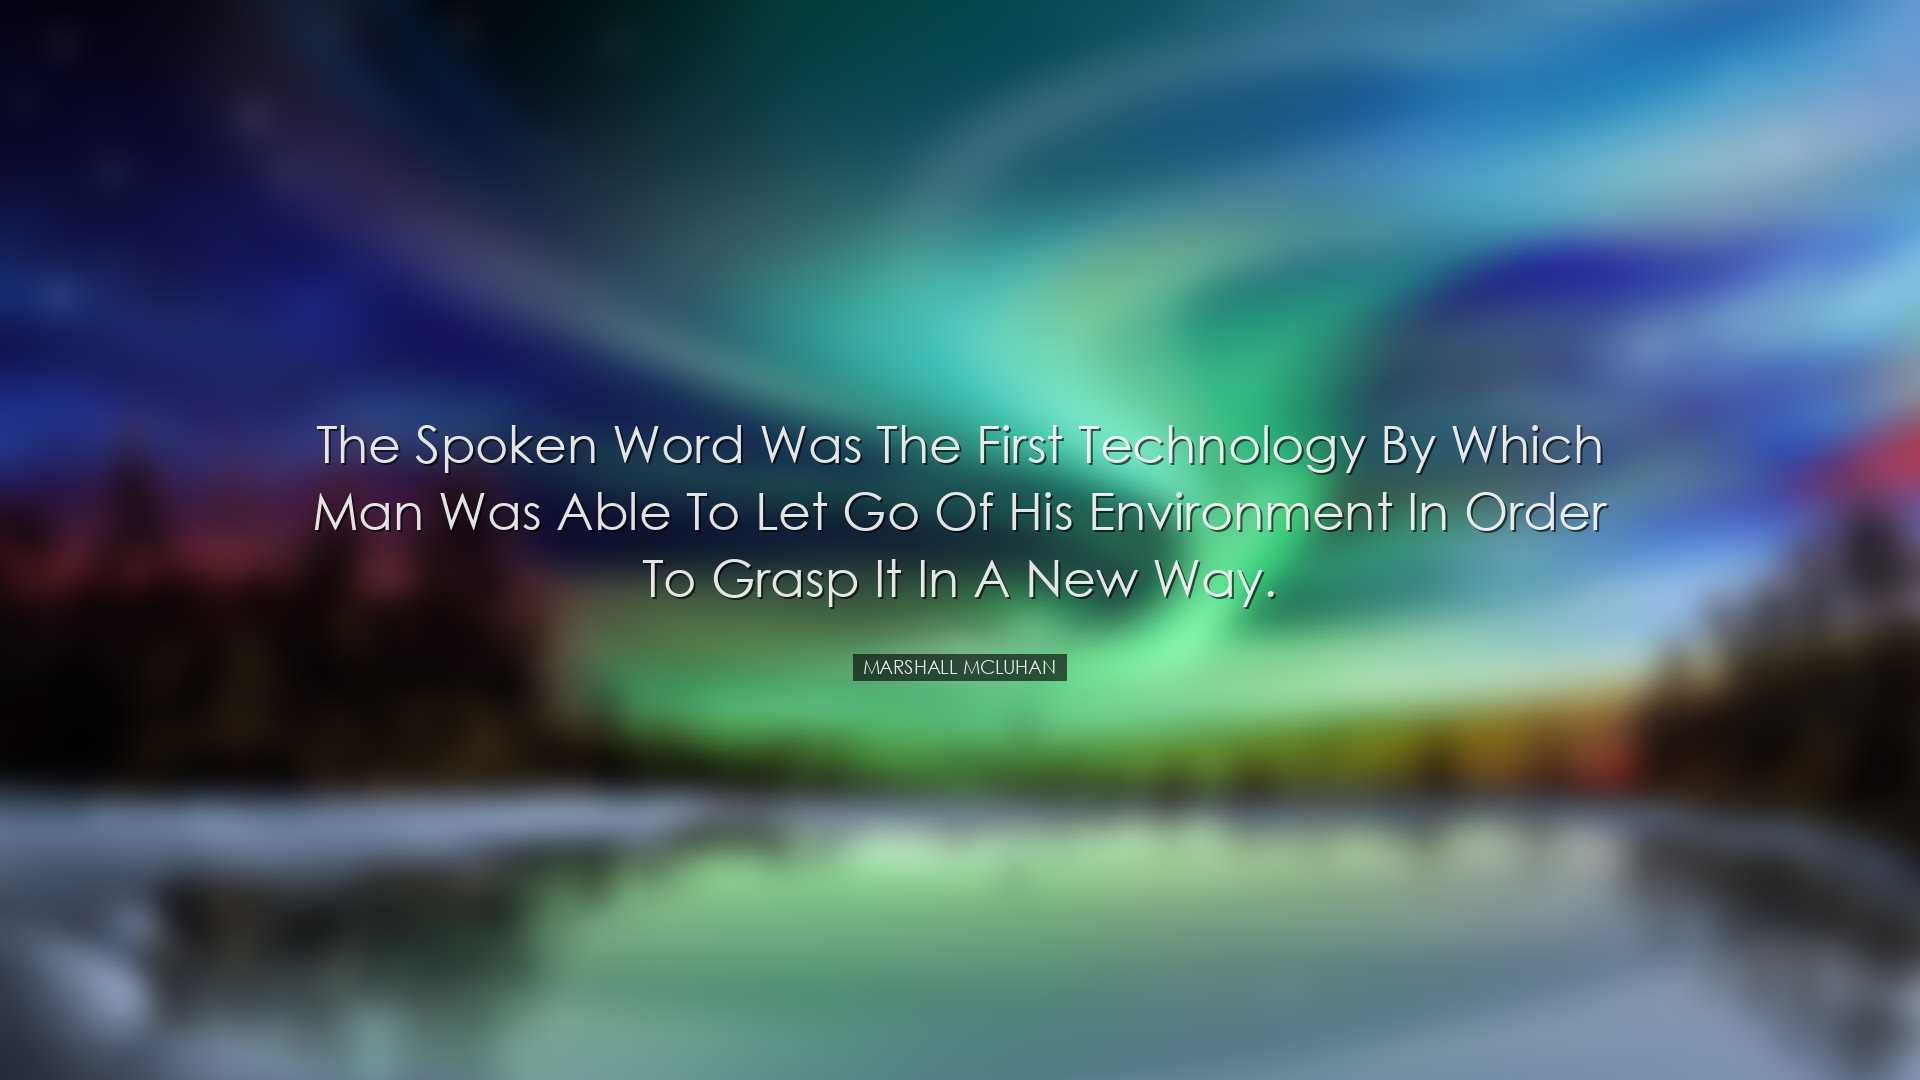 The spoken word was the first technology by which man was able to